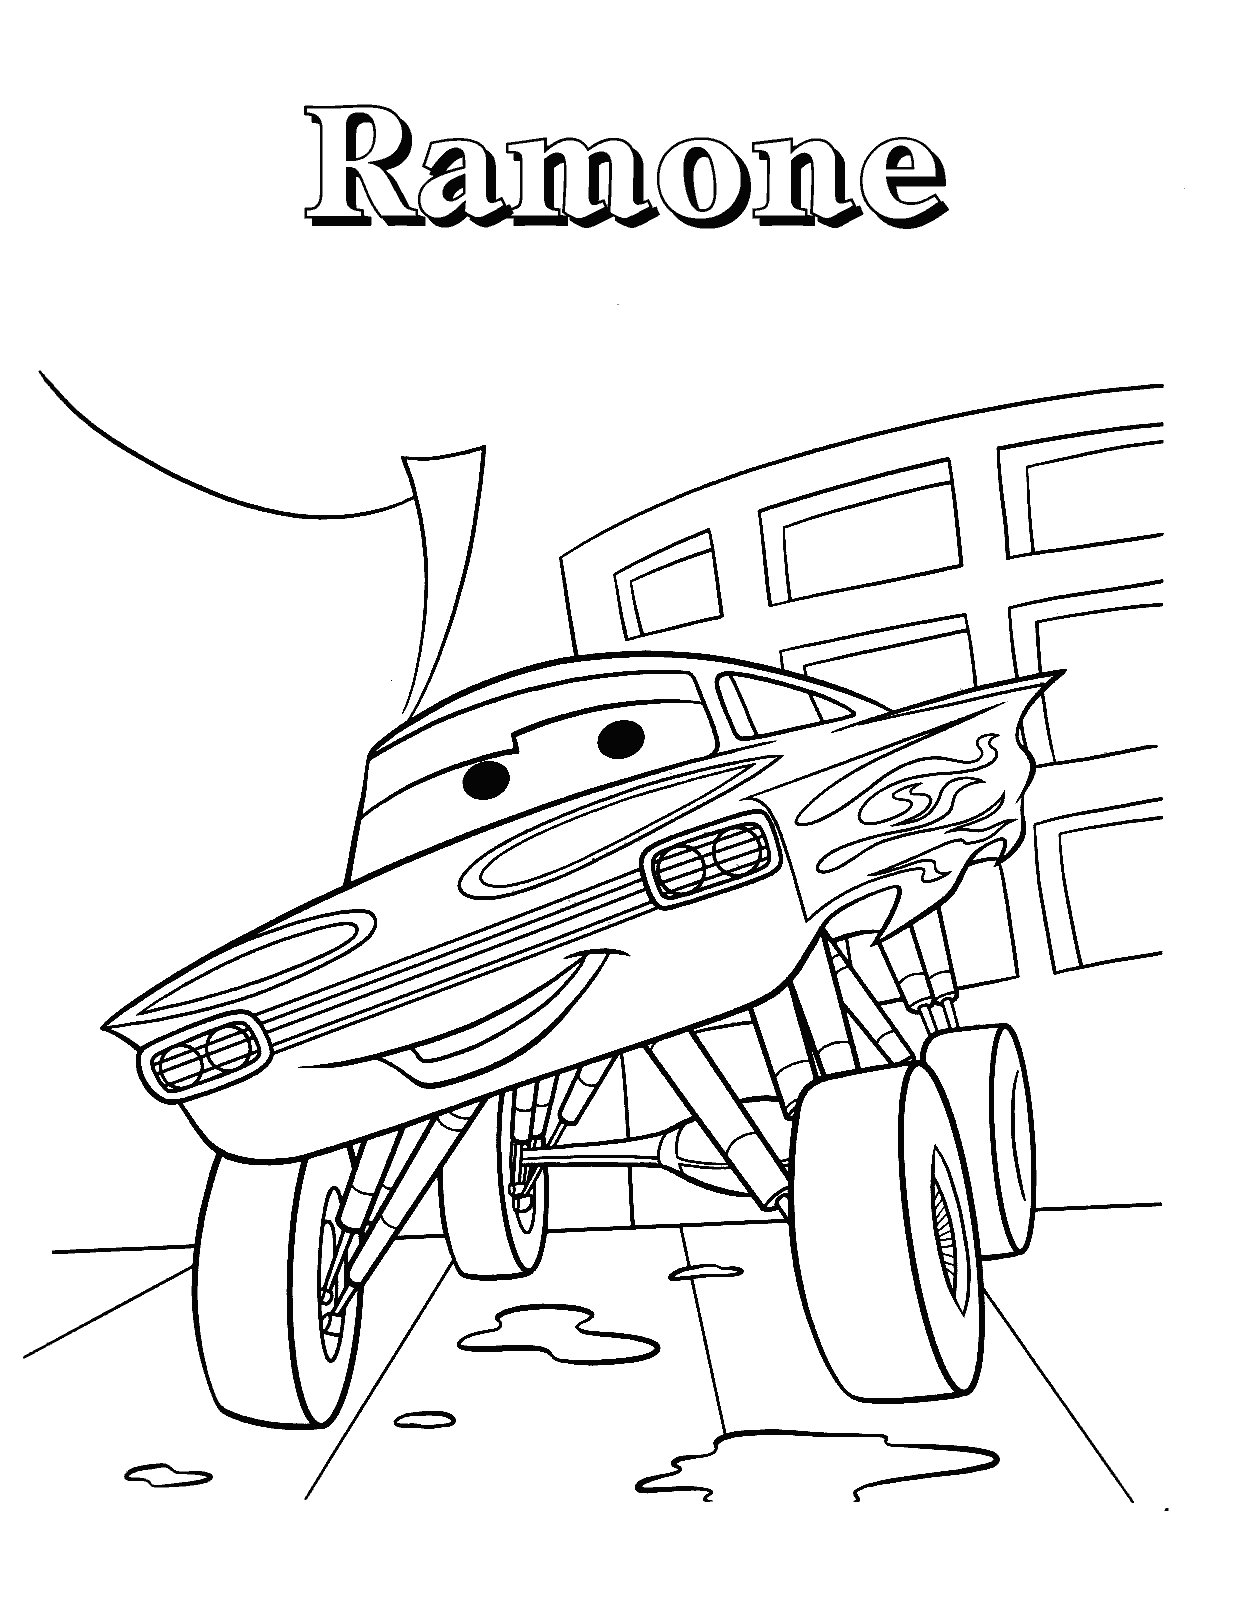 disney-cars-2-fillmore-coloring-pages-disney-cars-coloring-pages